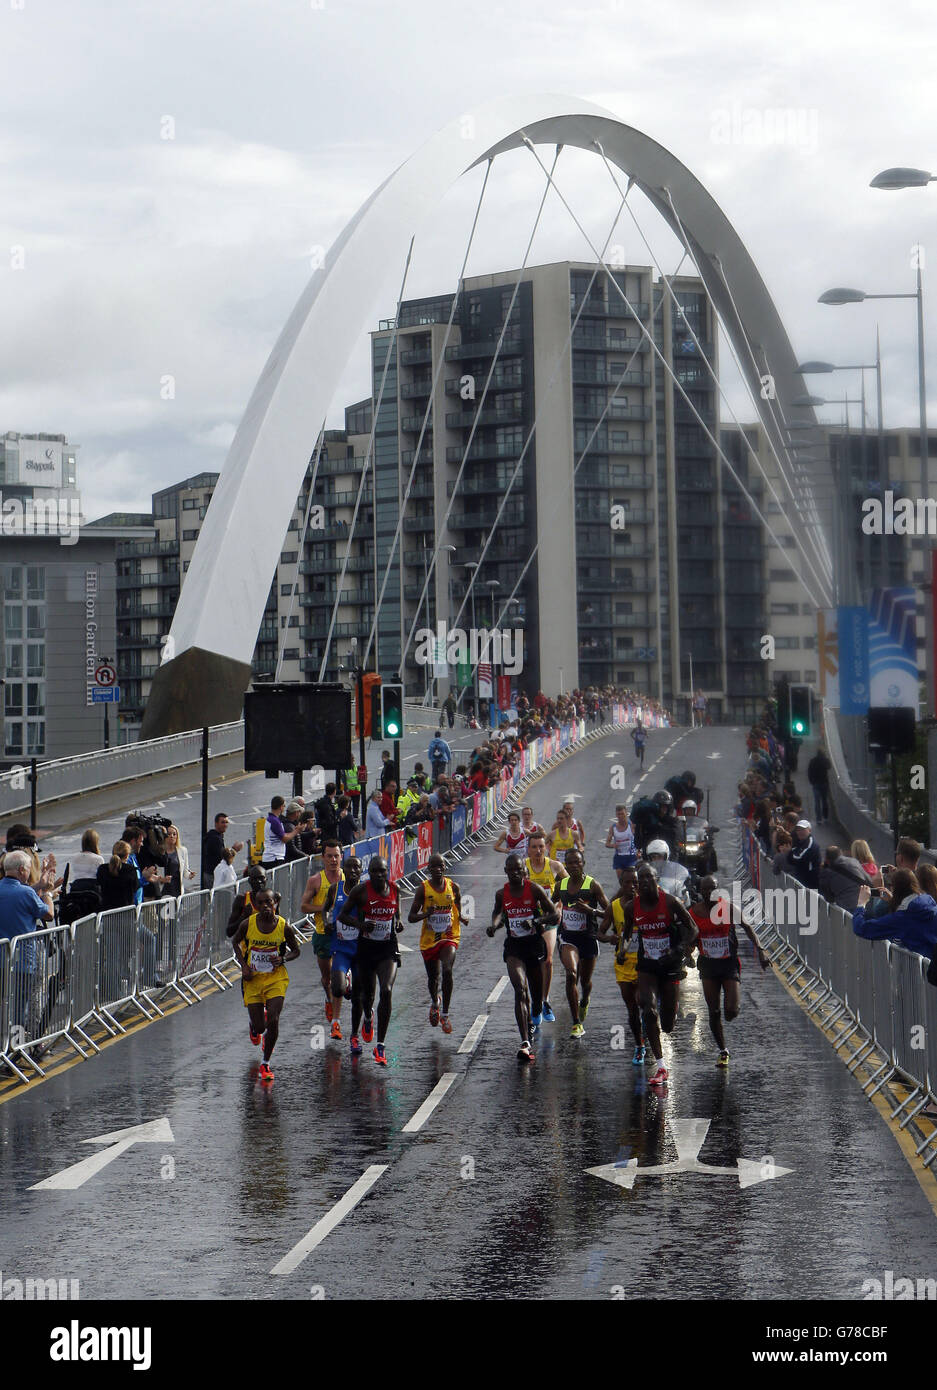 Sport - 2014 Commonwealth Games - Day Four. The Men's marathon goes under the Clyde Arch during the 2014 Commonwealth Games in Glasgow. Stock Photo